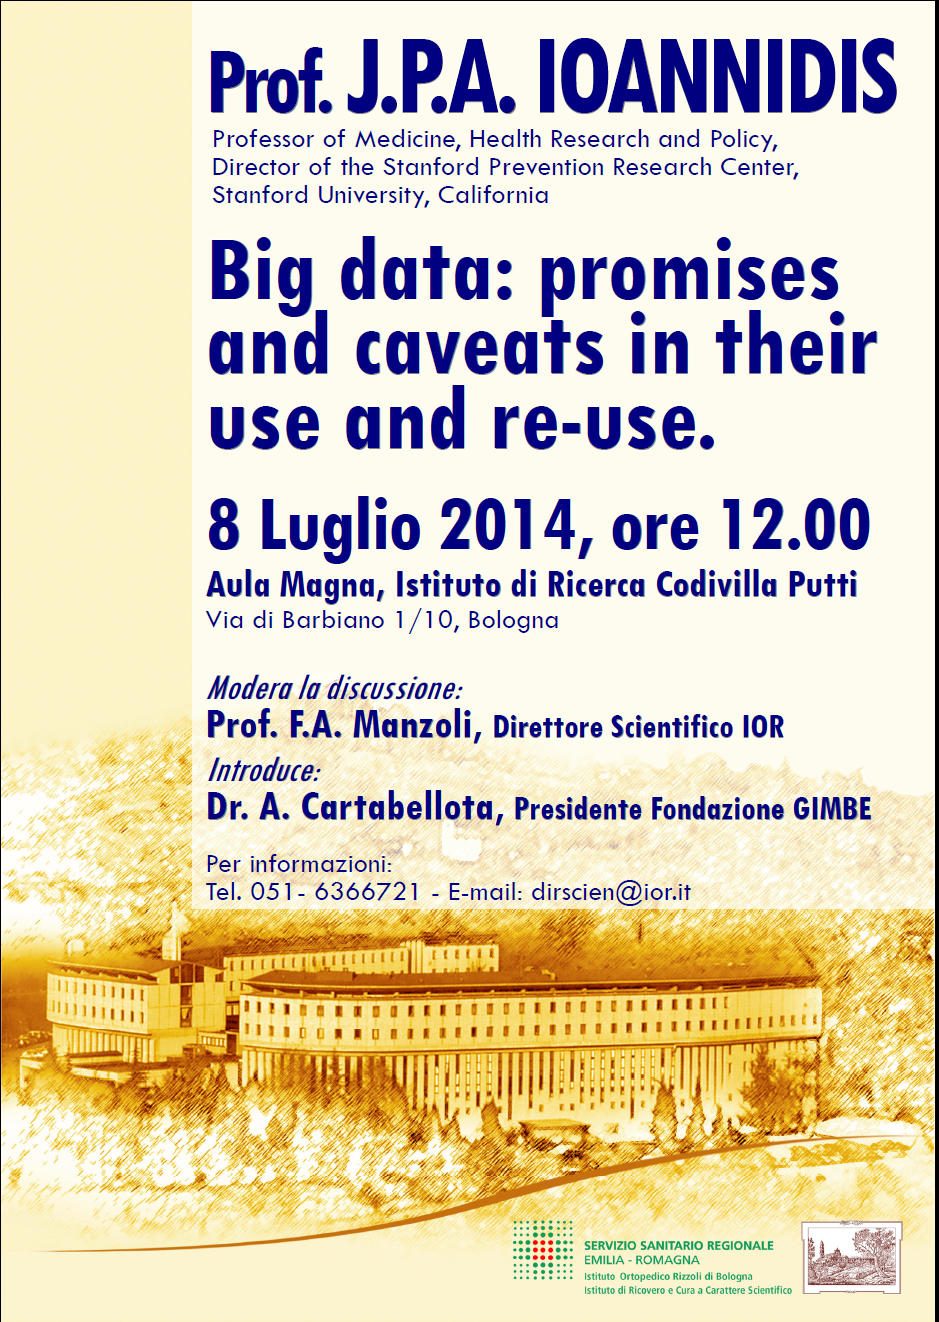 Big data: promises and caveats in their use and re-use